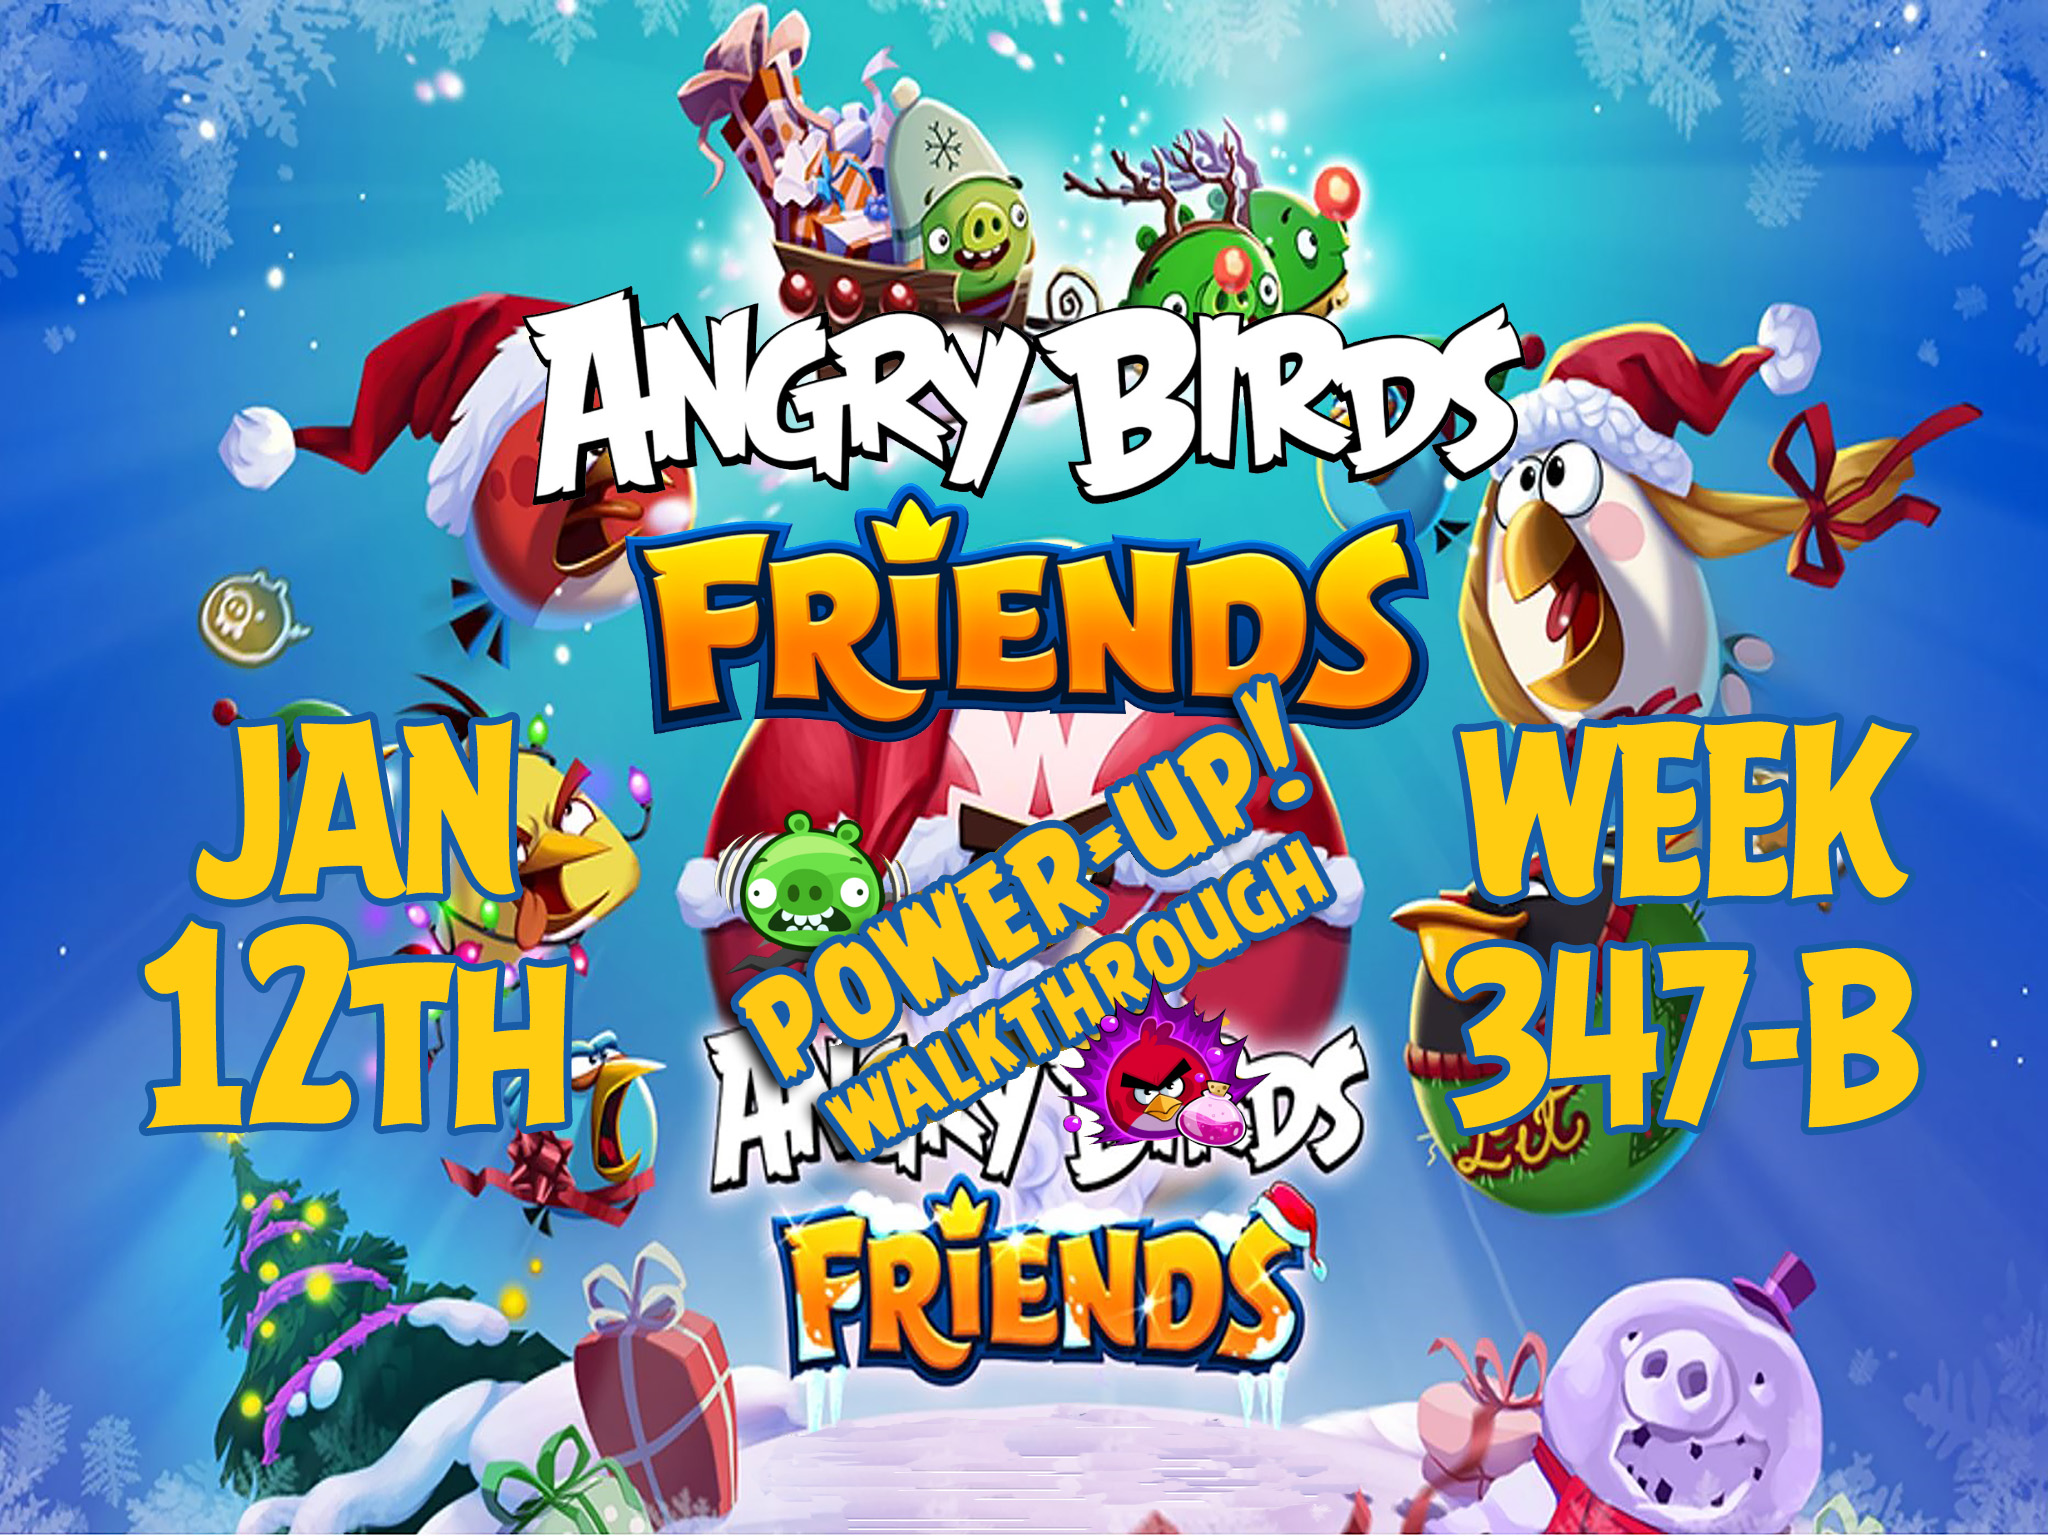 Angry-Birds-Friends-Tournament-Week-347-B-Feature-Image-PU